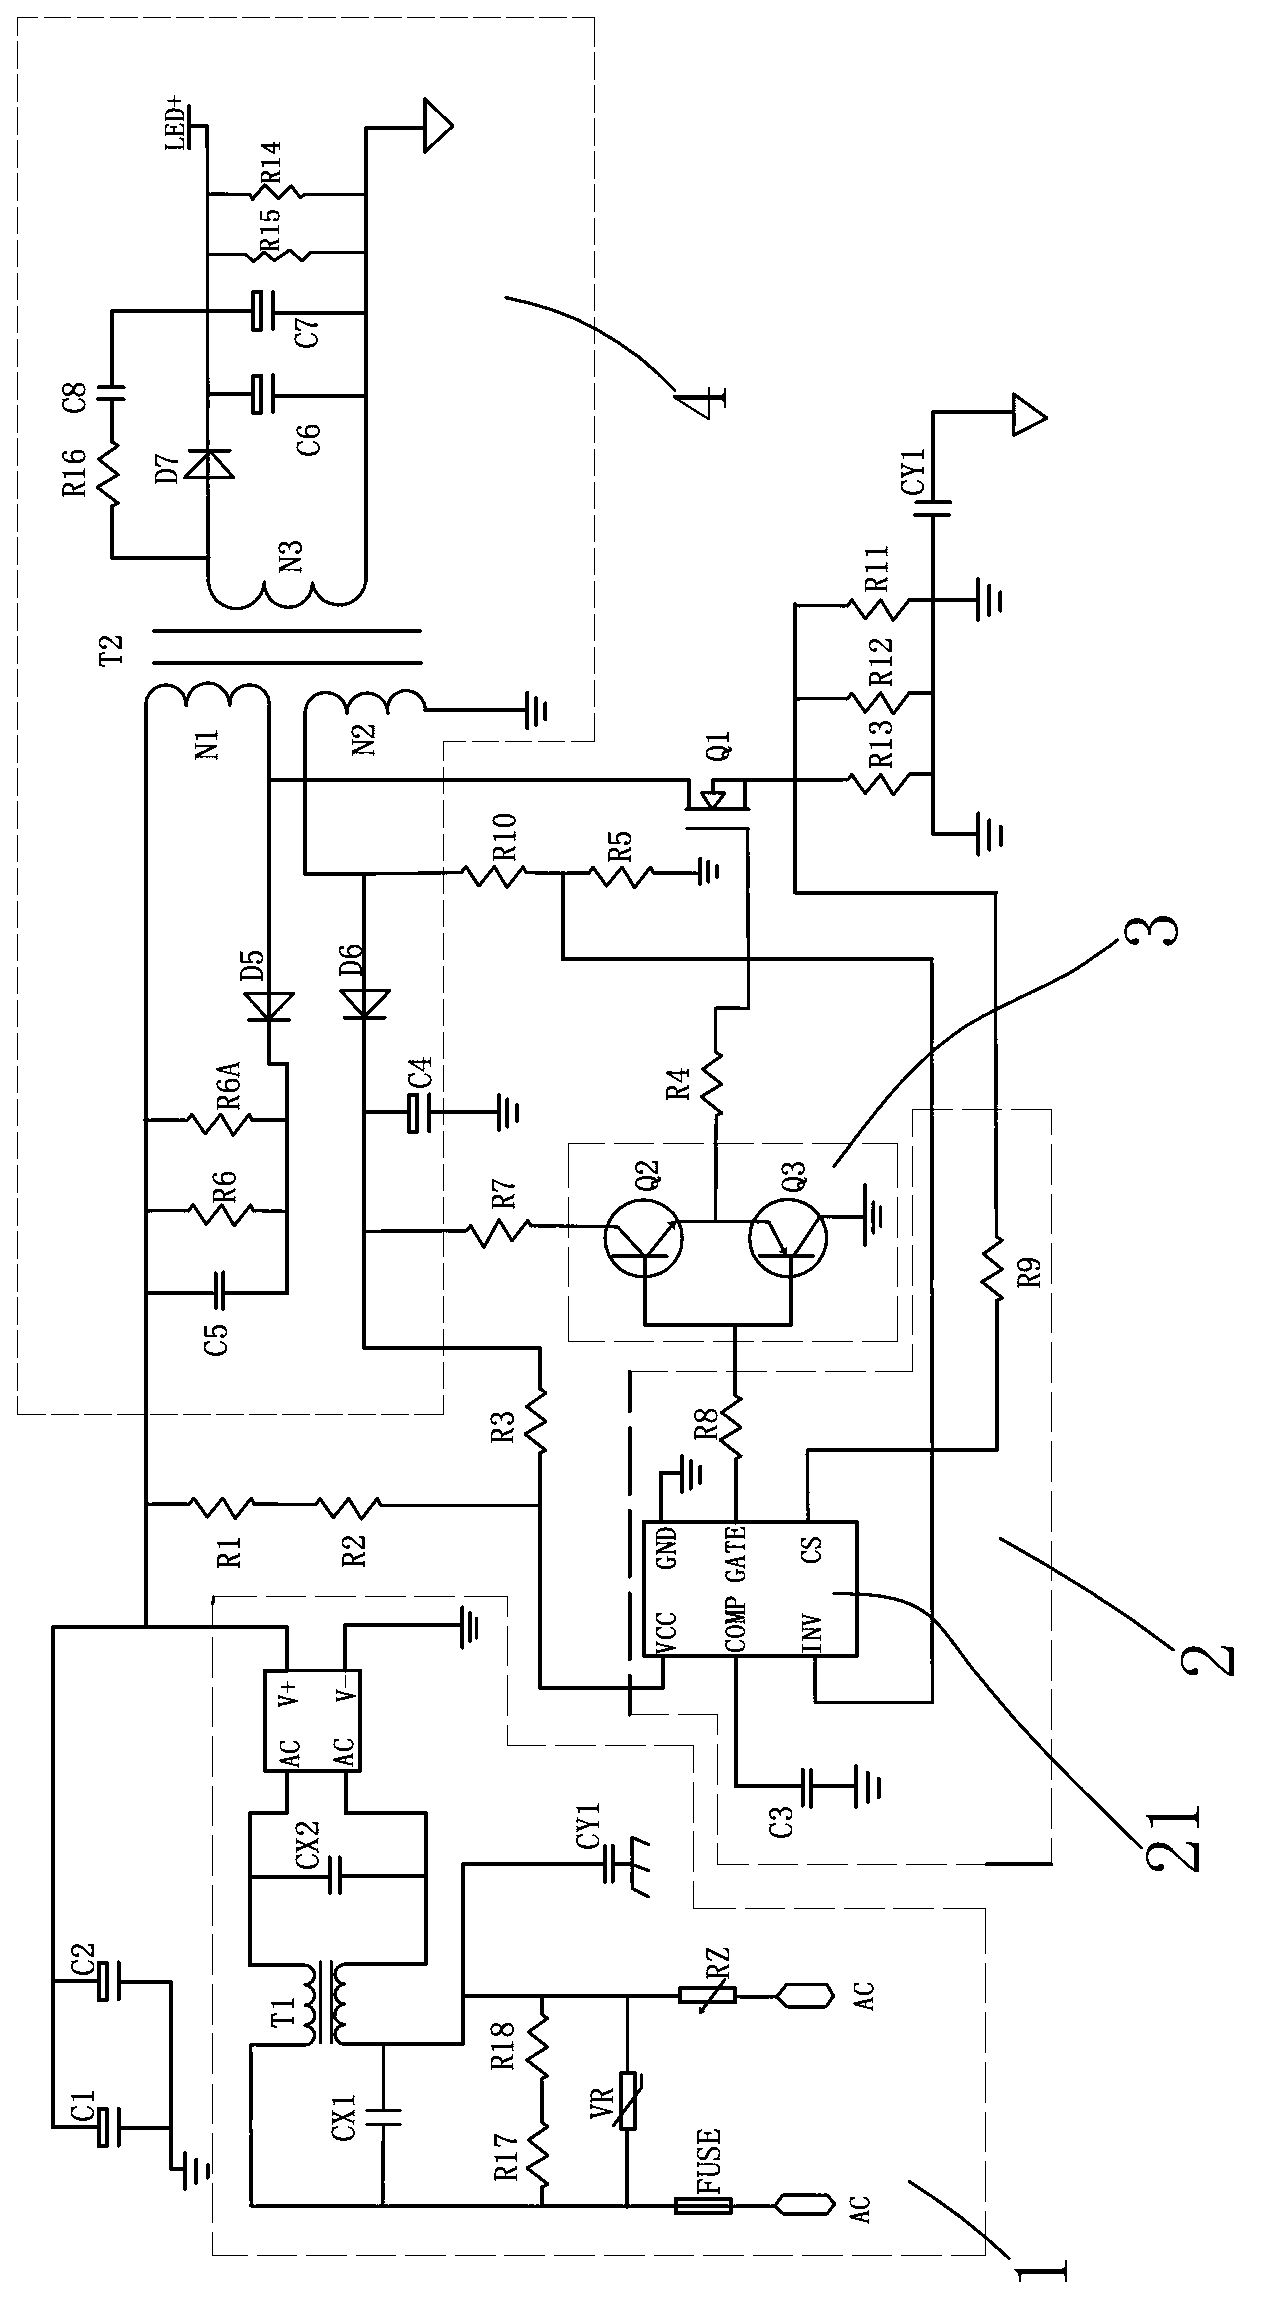 Totem pole light-emitting diode (LED) driving power source